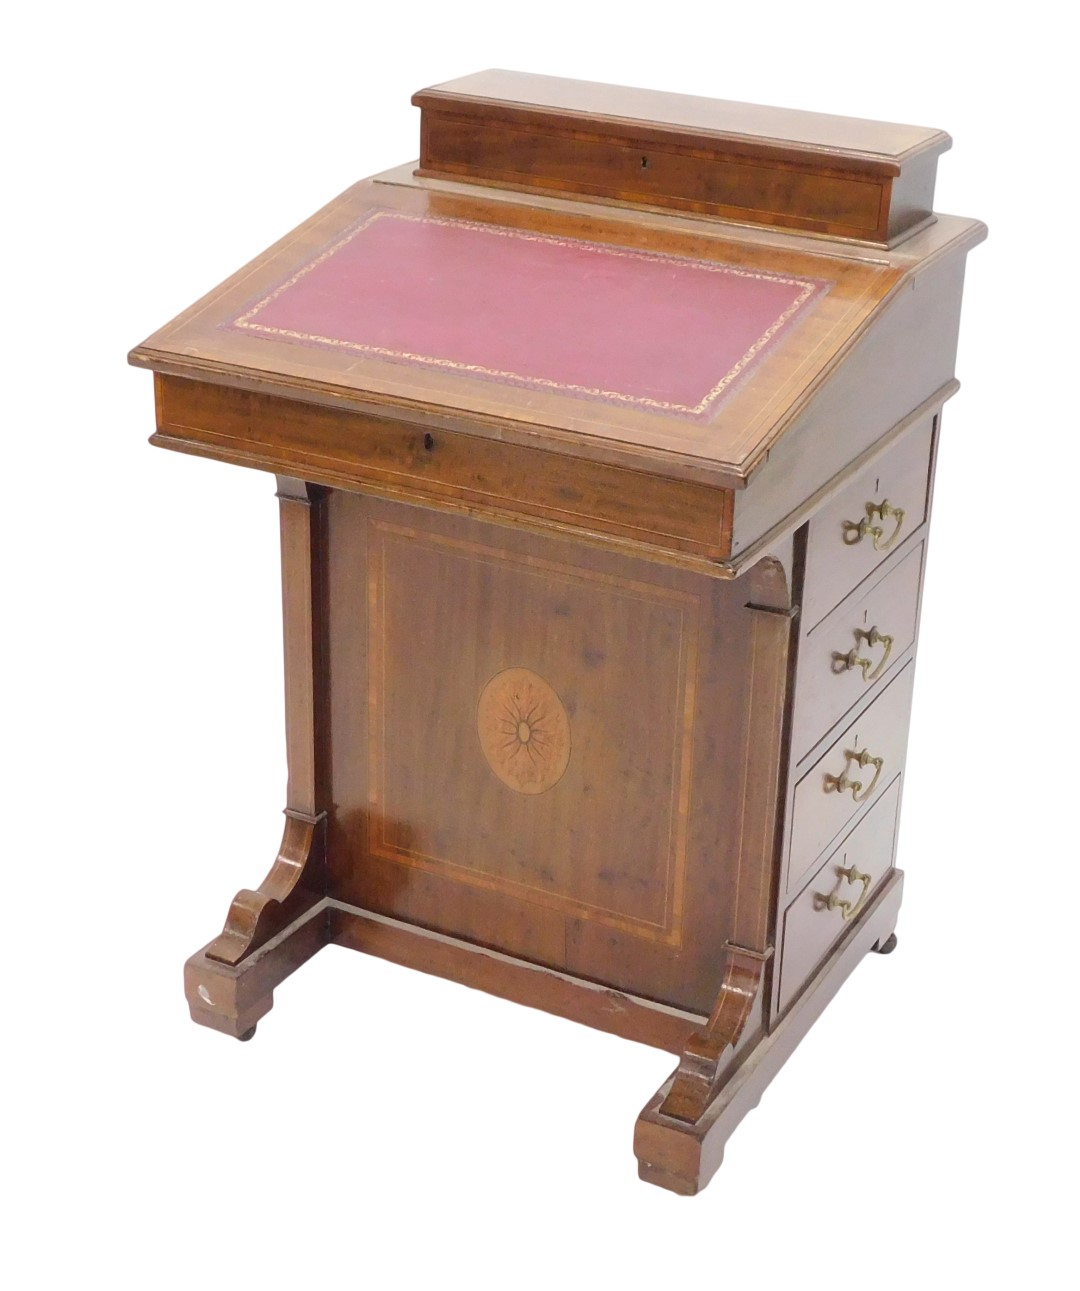 An Edwardian mahogany and satinwood cross banded Davenport, the top with a hinged letter compartment